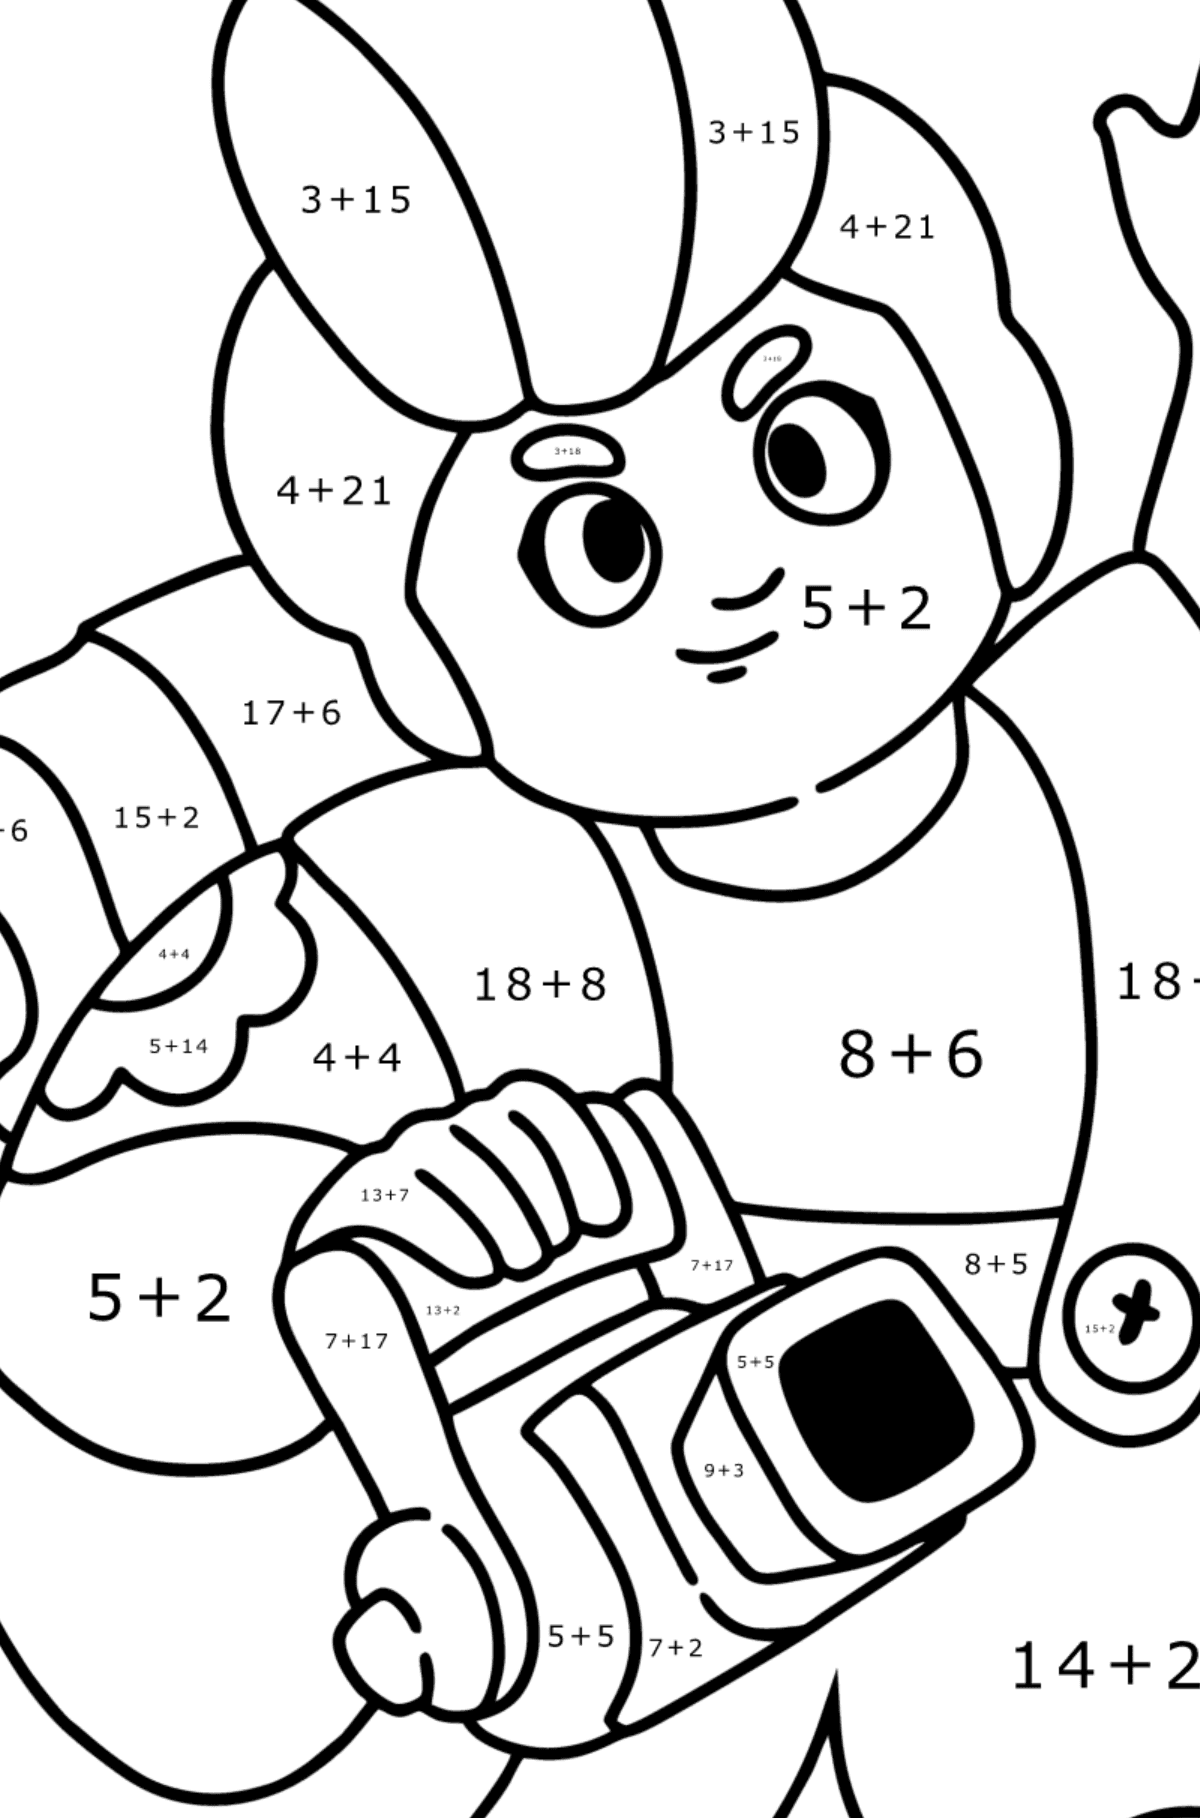 Brawl Stars Pam coloring page - Math Coloring - Addition for Kids